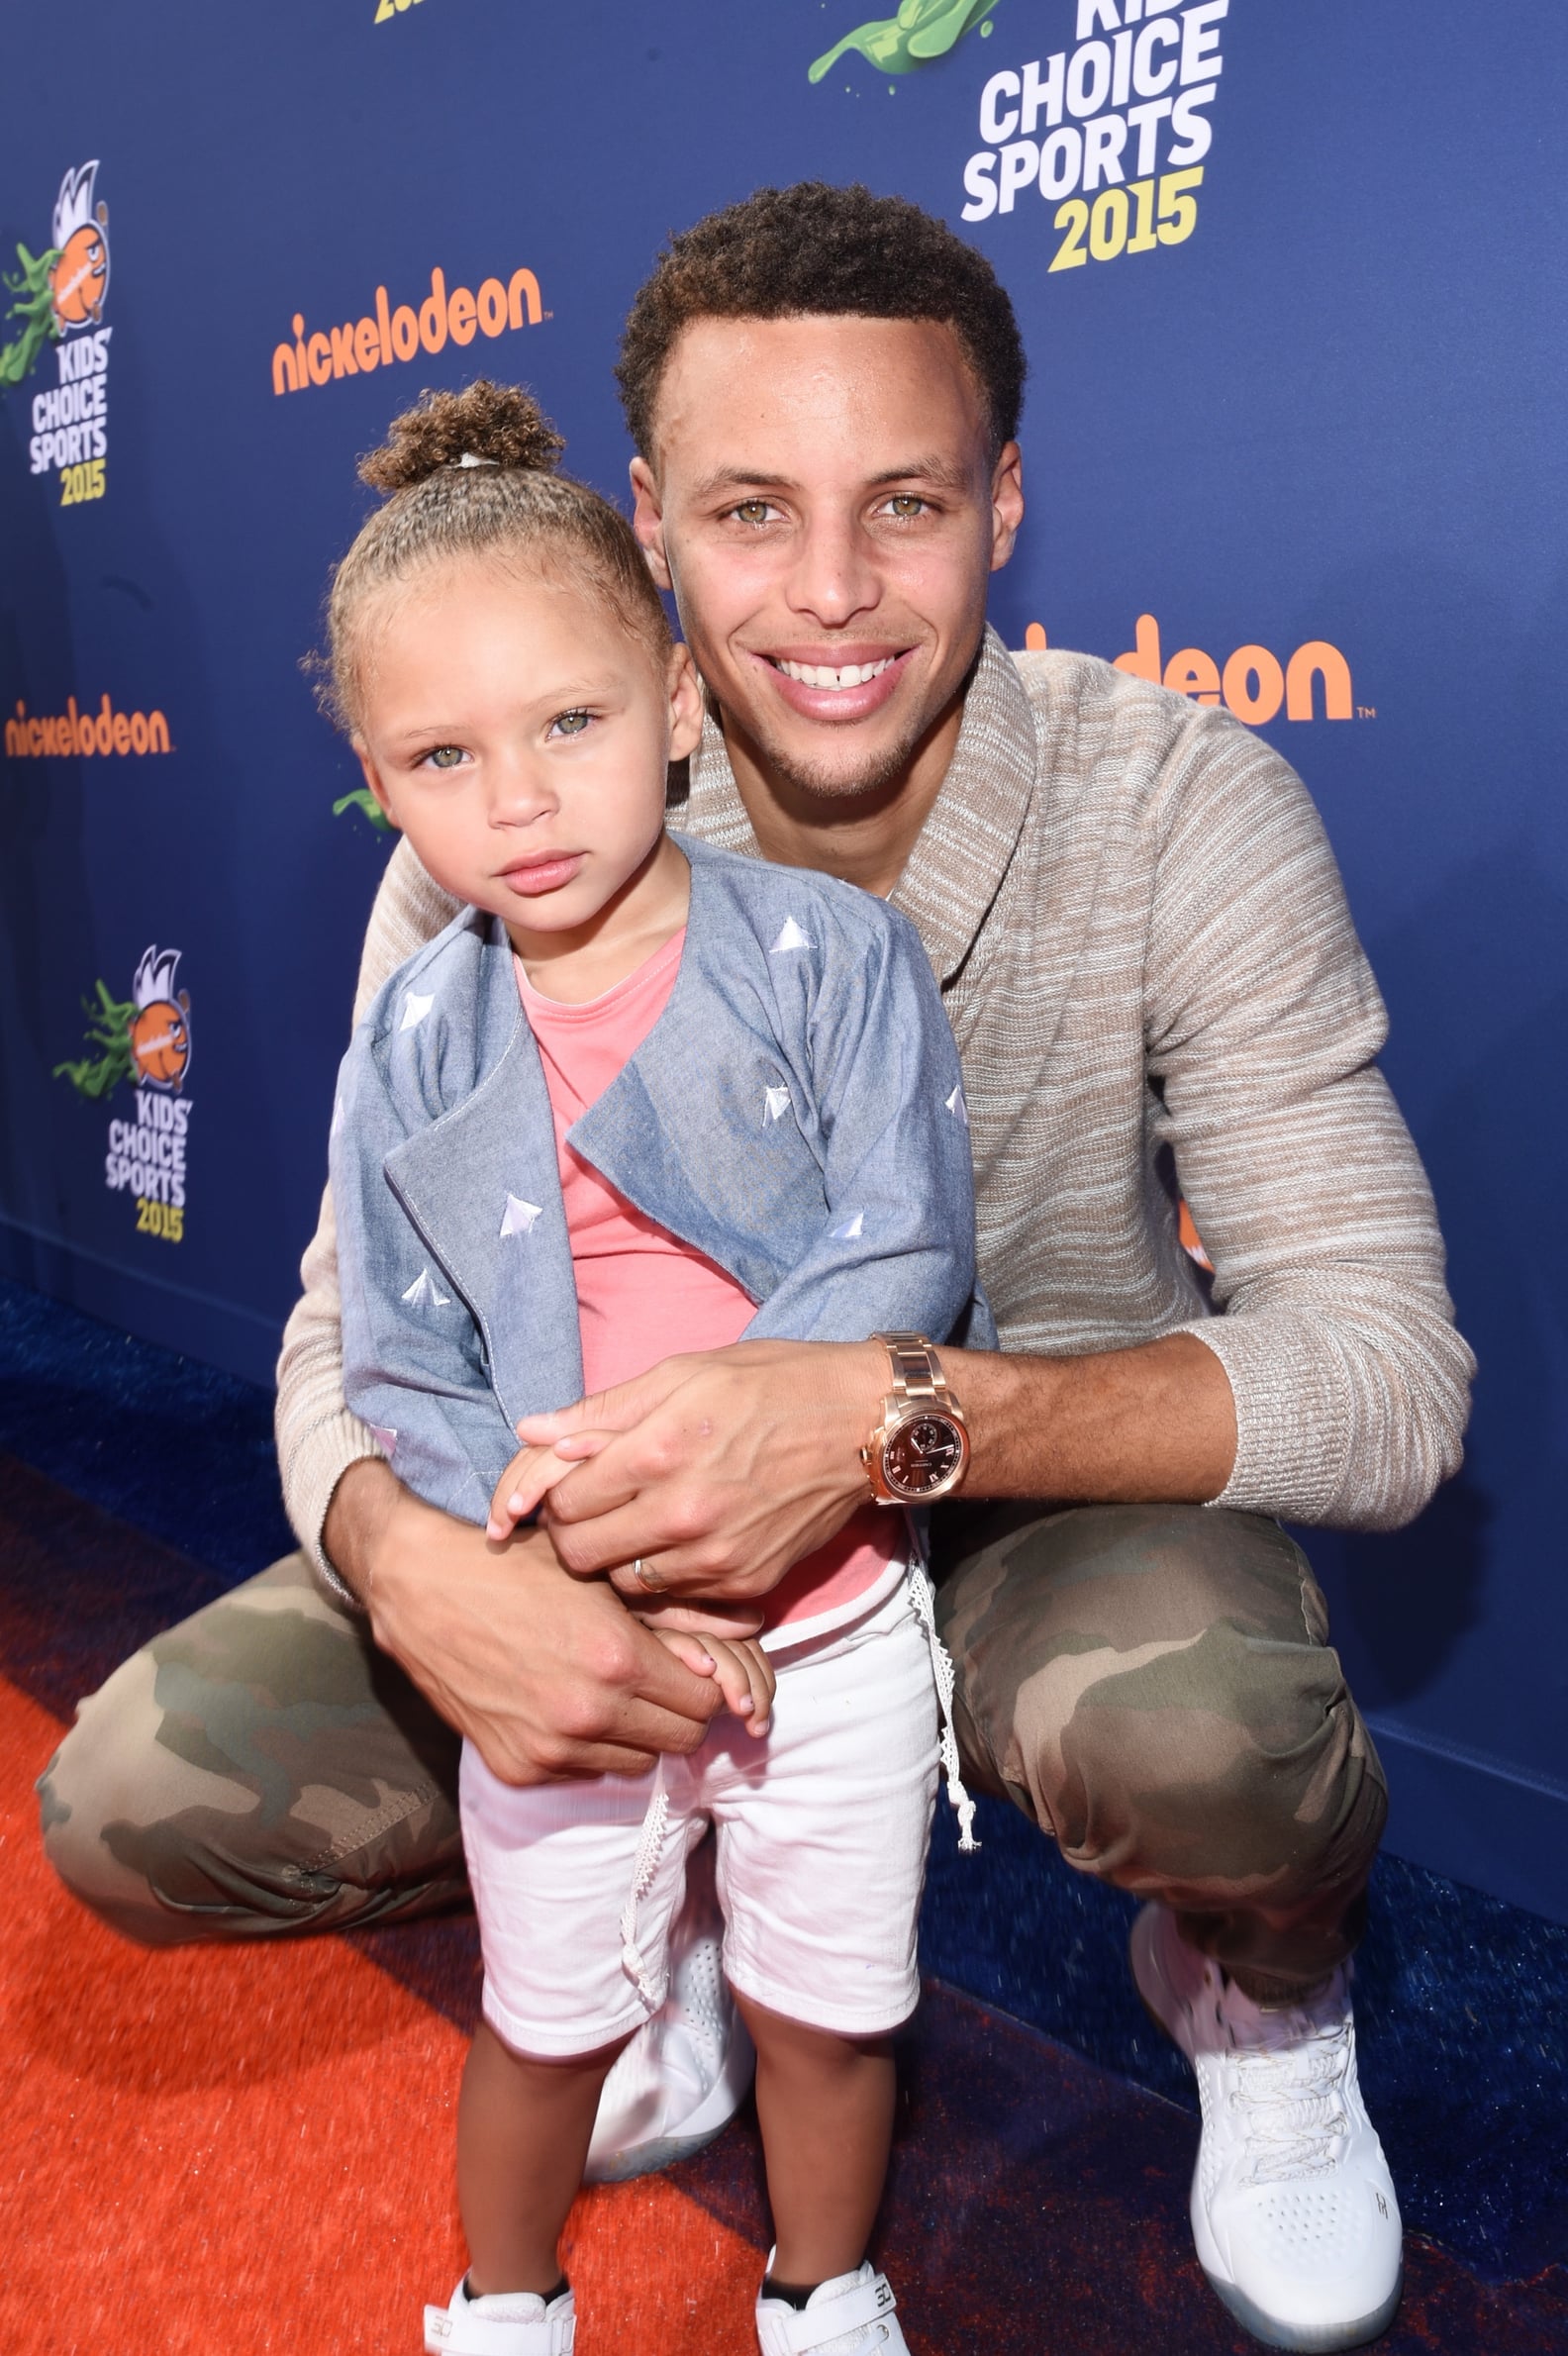 likhoa stephen curry shares heartfelt throwback moments with daughter riley from years ago surprising online community 654264d87455a Stephen Curry Shares Heartfelt Throwback Moments With Daughter Riley From 10 Years Ago, Surprising Online Community